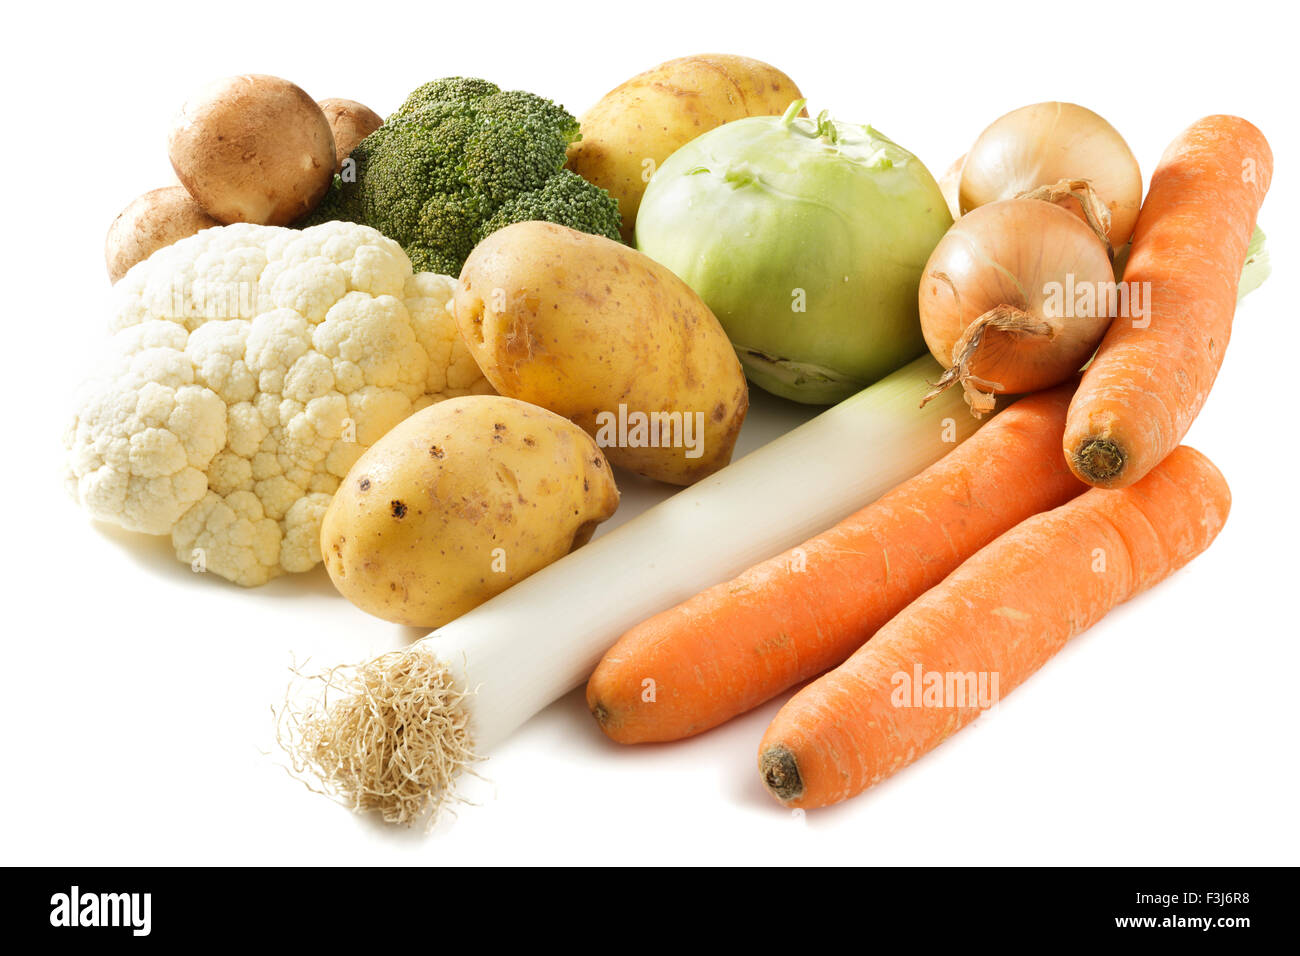 selection of winter vegetables Stock Photo